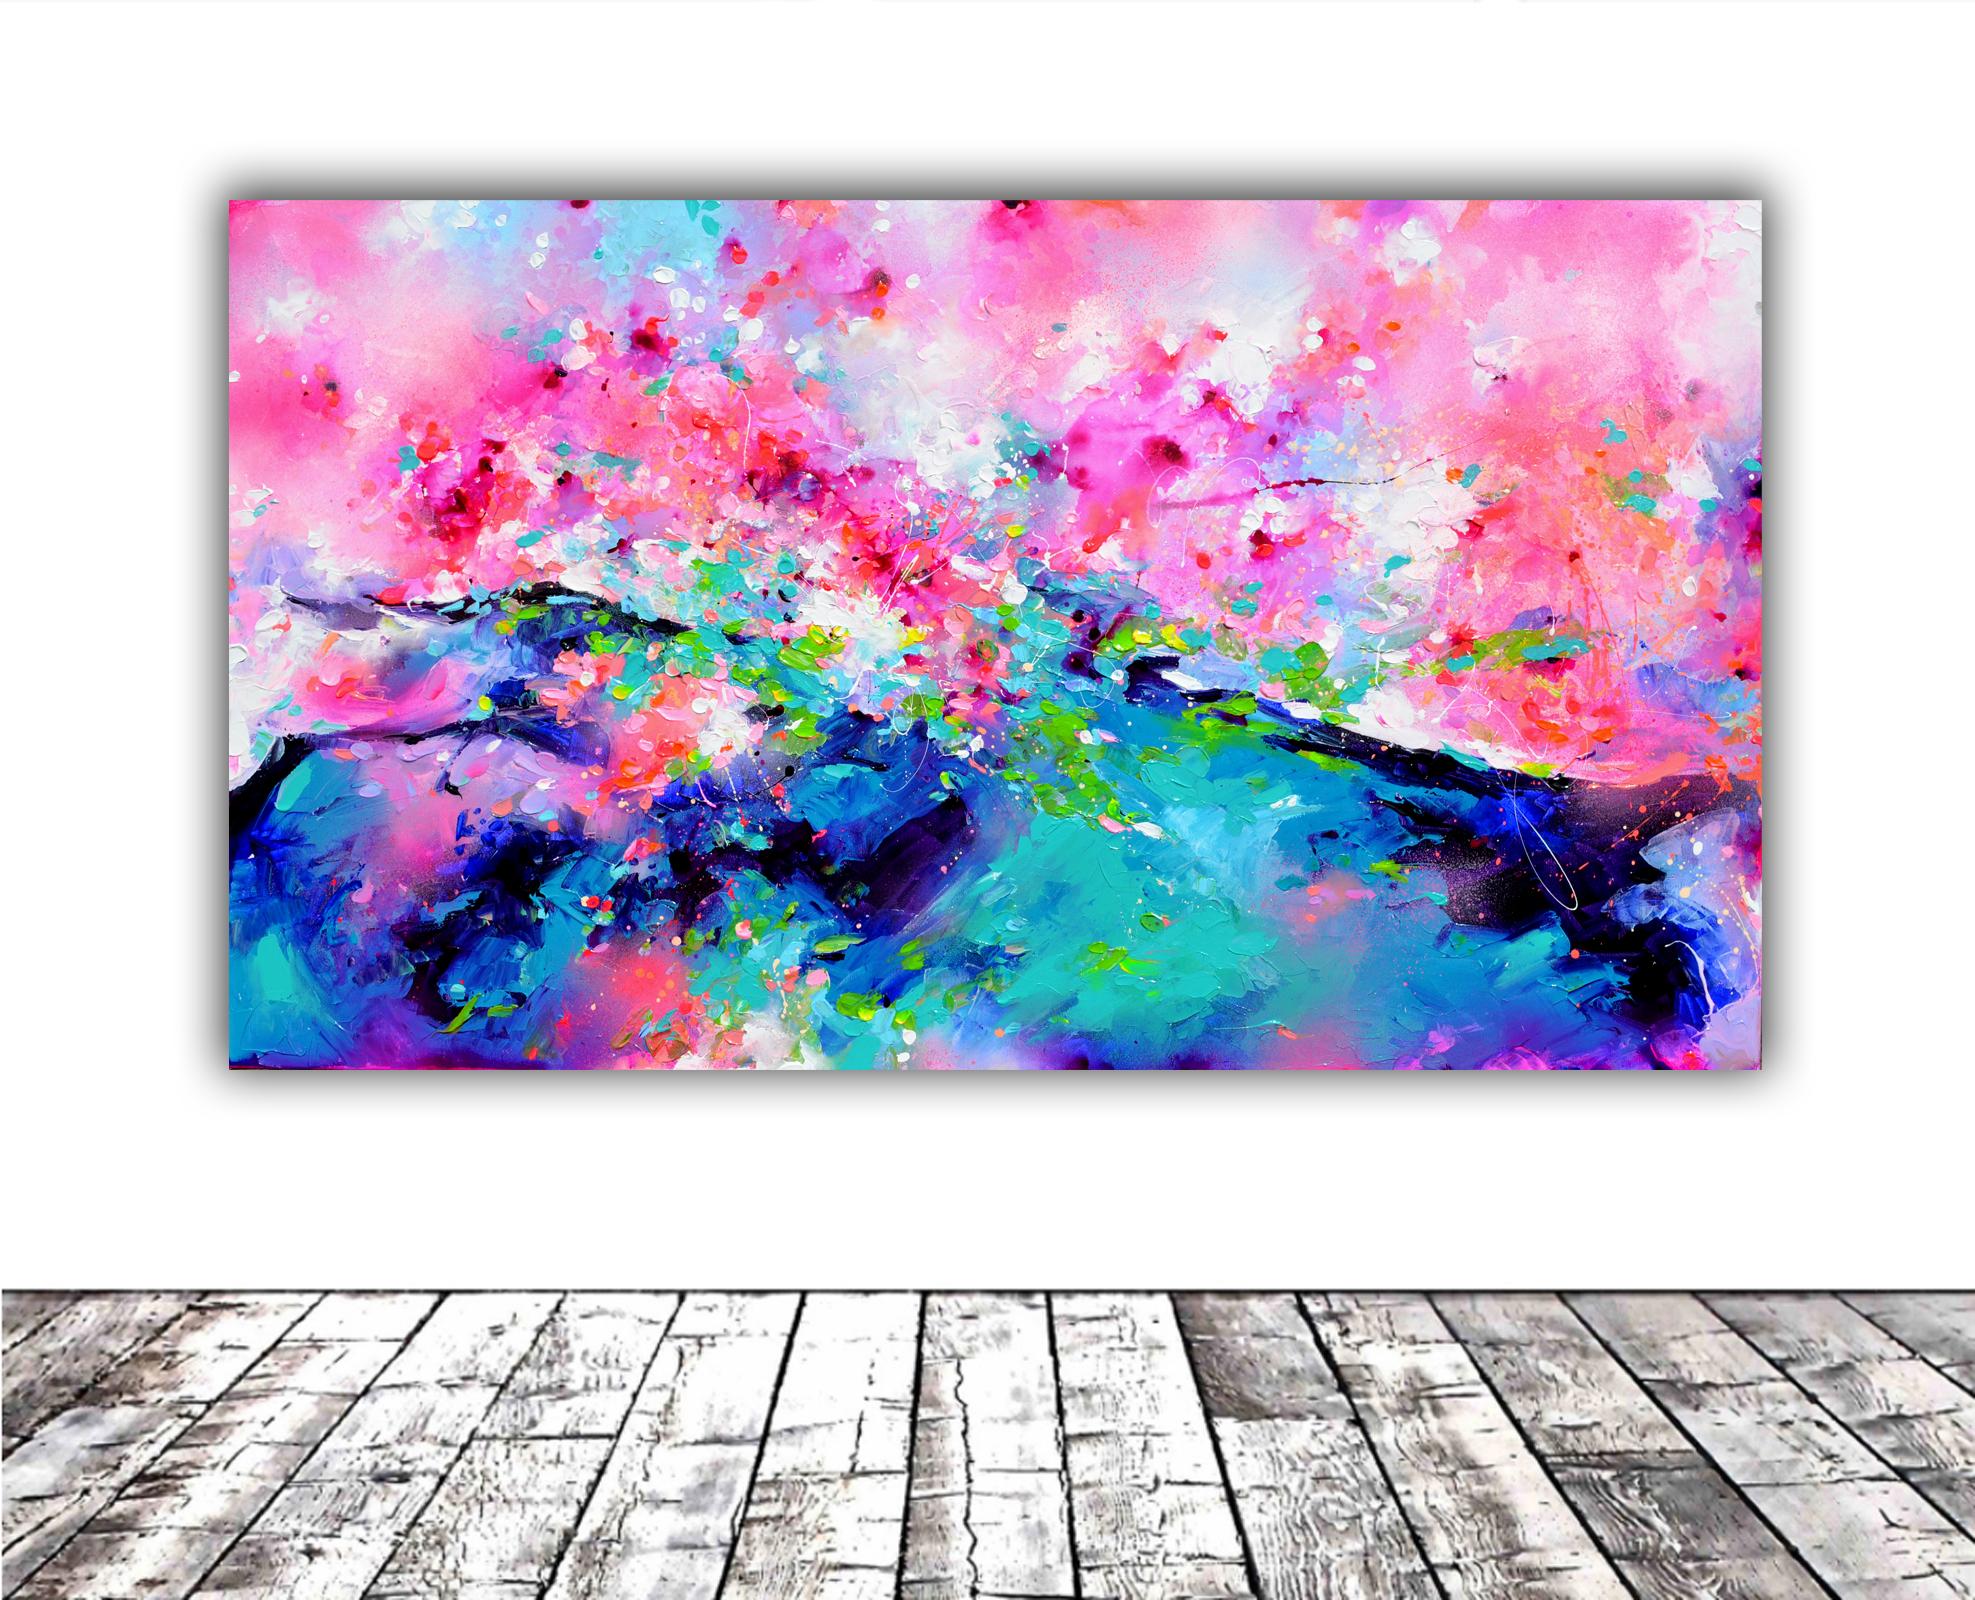 Ready to hang with the edges painted

A beautiful modern abstract, 100% handmade painting, made with professional varnished acrylics and Amsterdam acrylic sprays on stretched heavy canvas.

Dimensions: 140X80X2 cm, 55.12x31.5x0.8 inches

It is